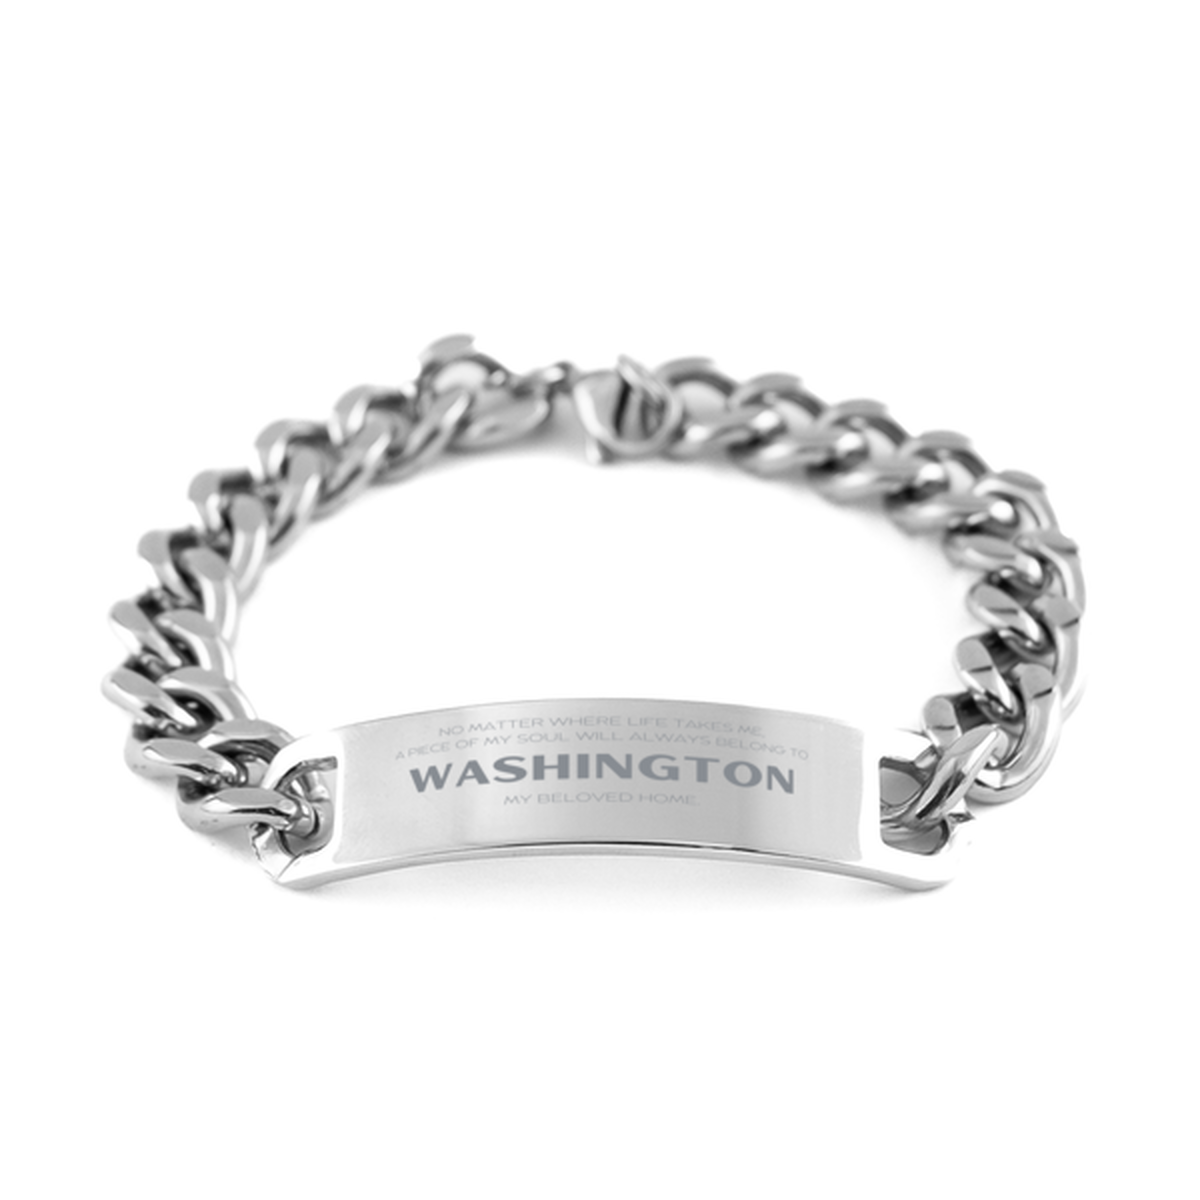 Love Washington State Gifts, My soul will always belong to Washington, Proud Cuban Chain Stainless Steel Bracelet, Birthday Unique Gifts For Washington Men, Women, Friends